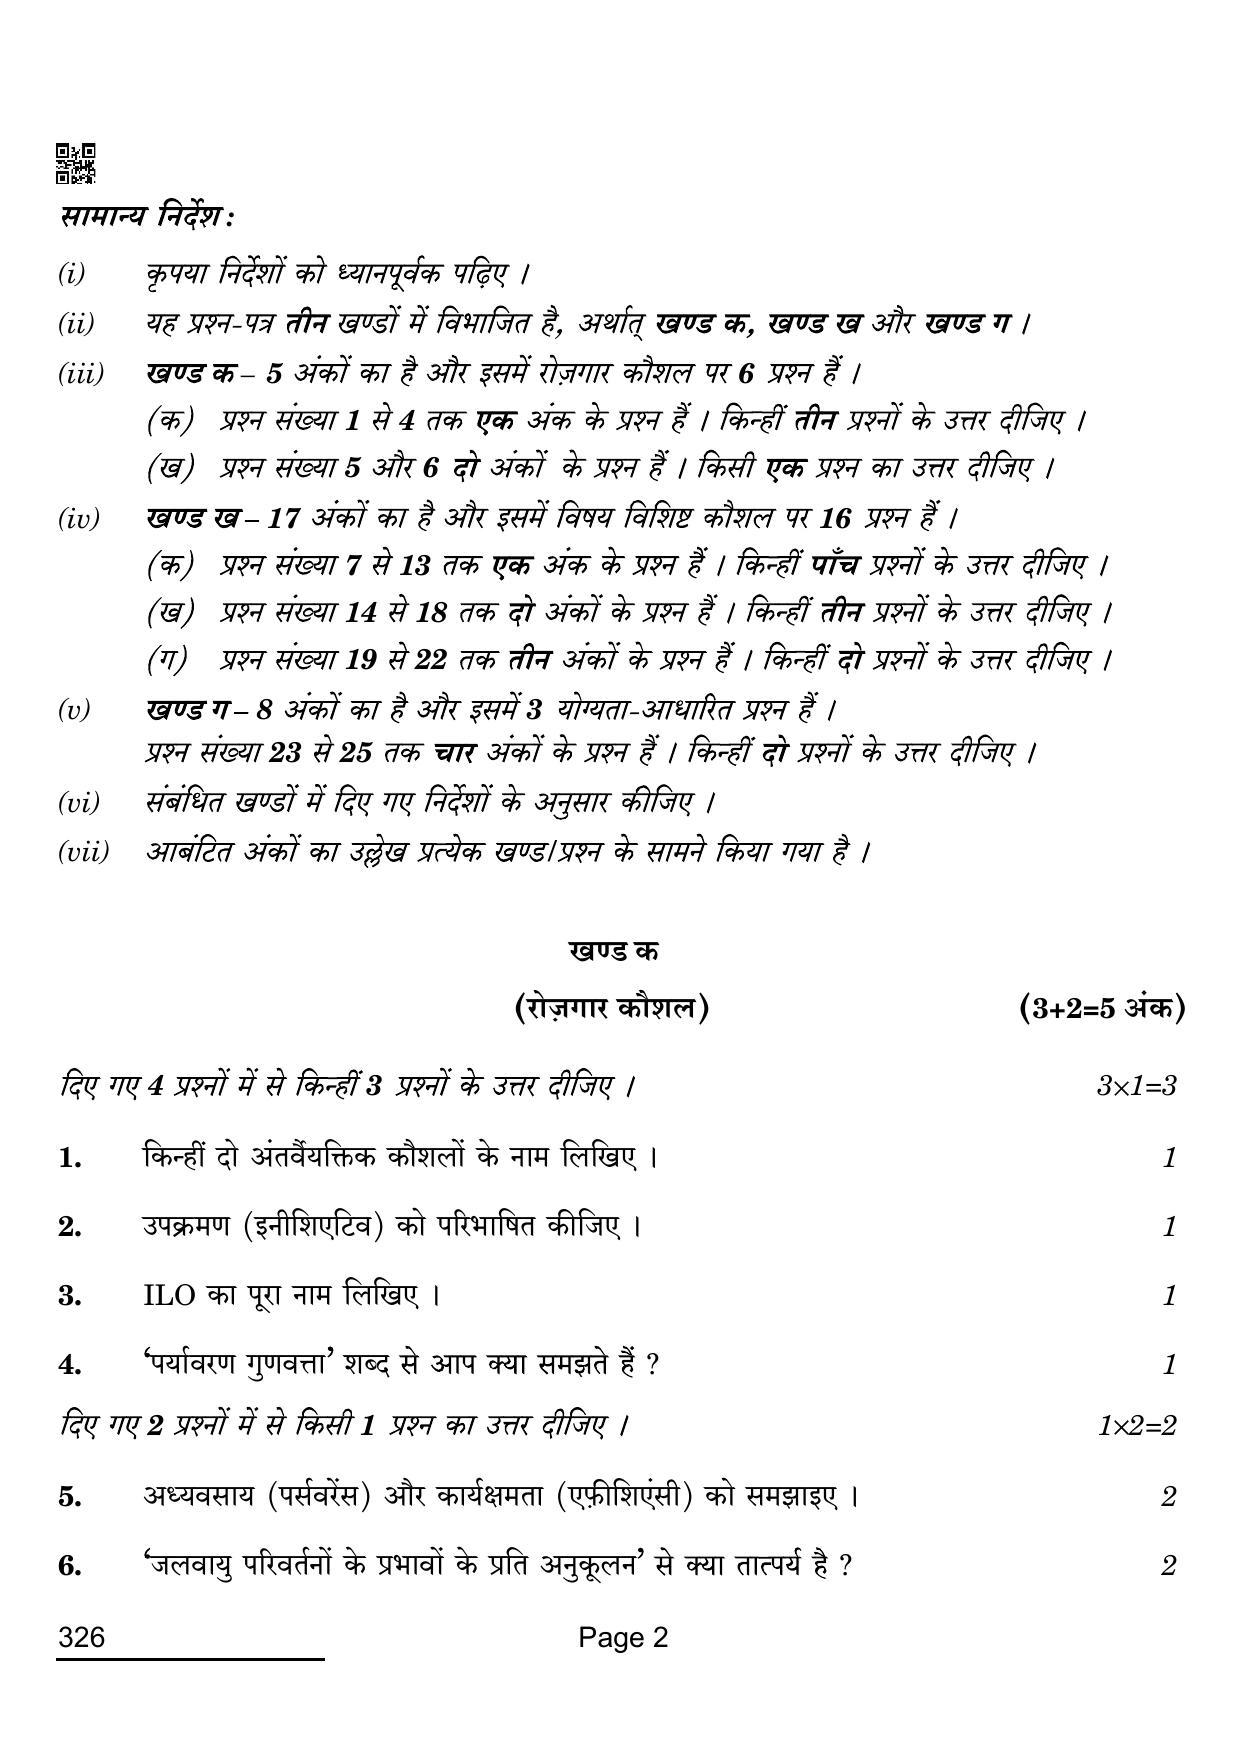 CBSE Class 12 326_Information Technology 2022 Question Paper - Page 2